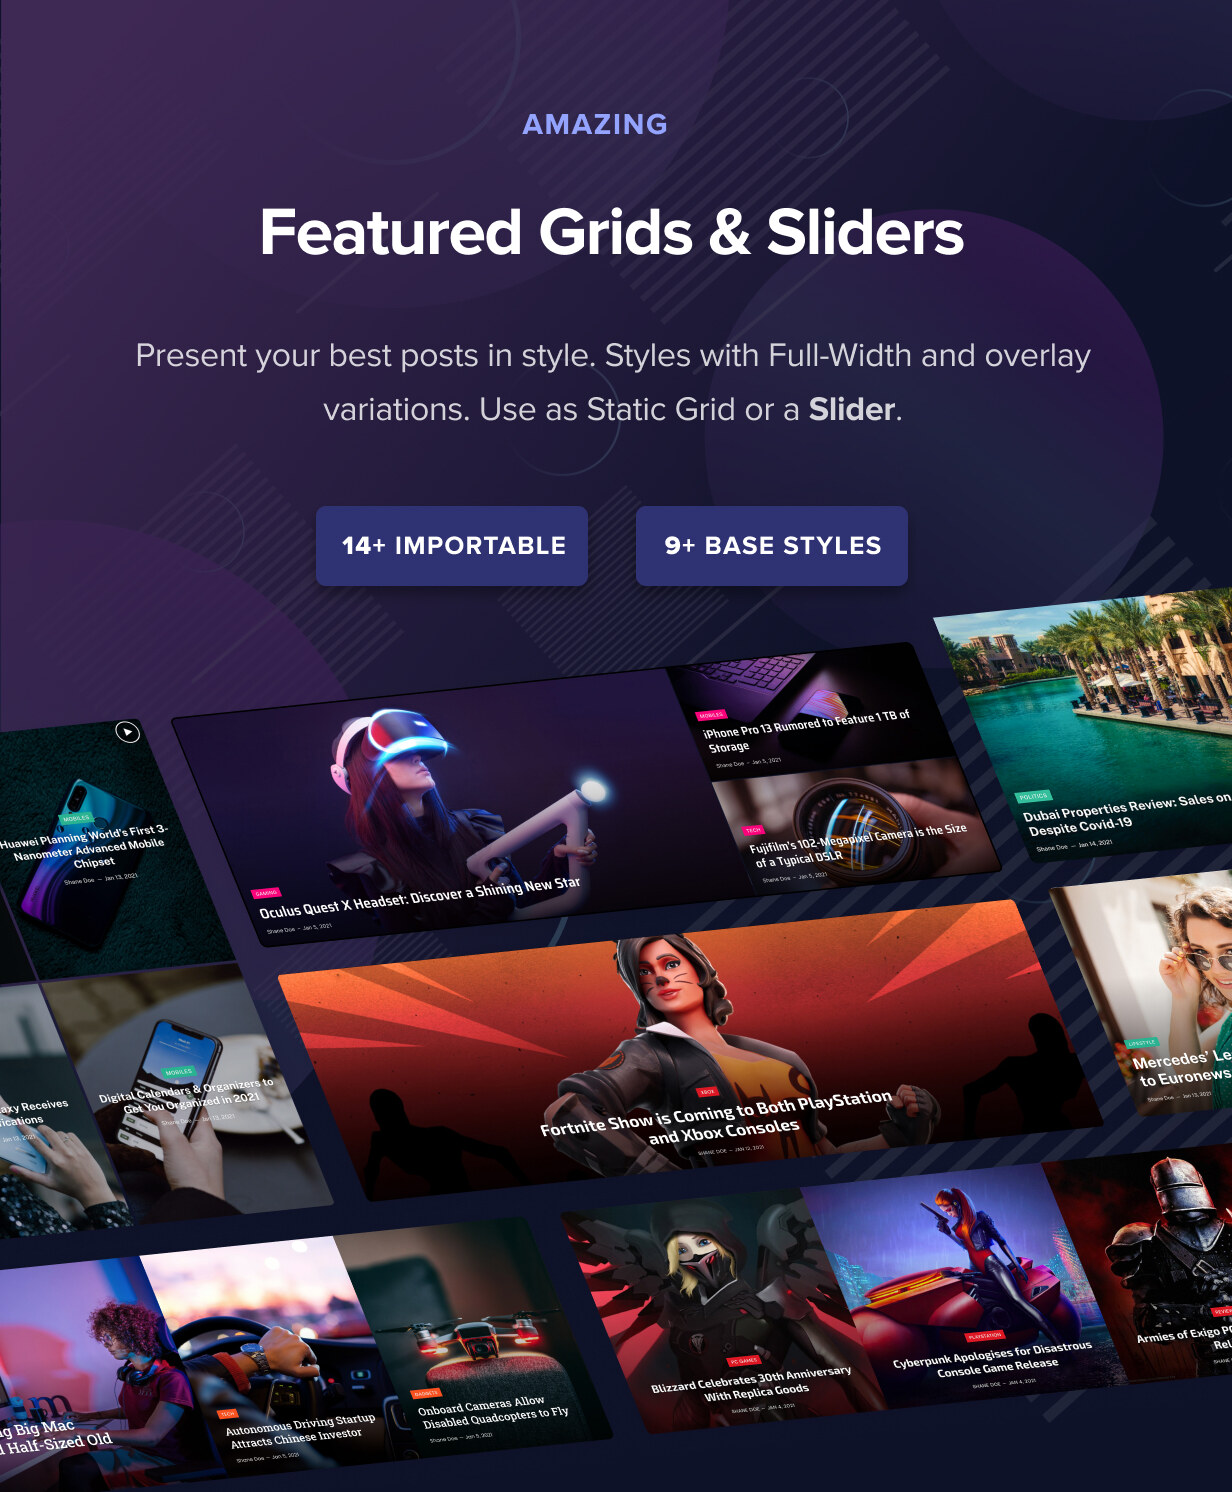 Featured grids and SLIDERS.